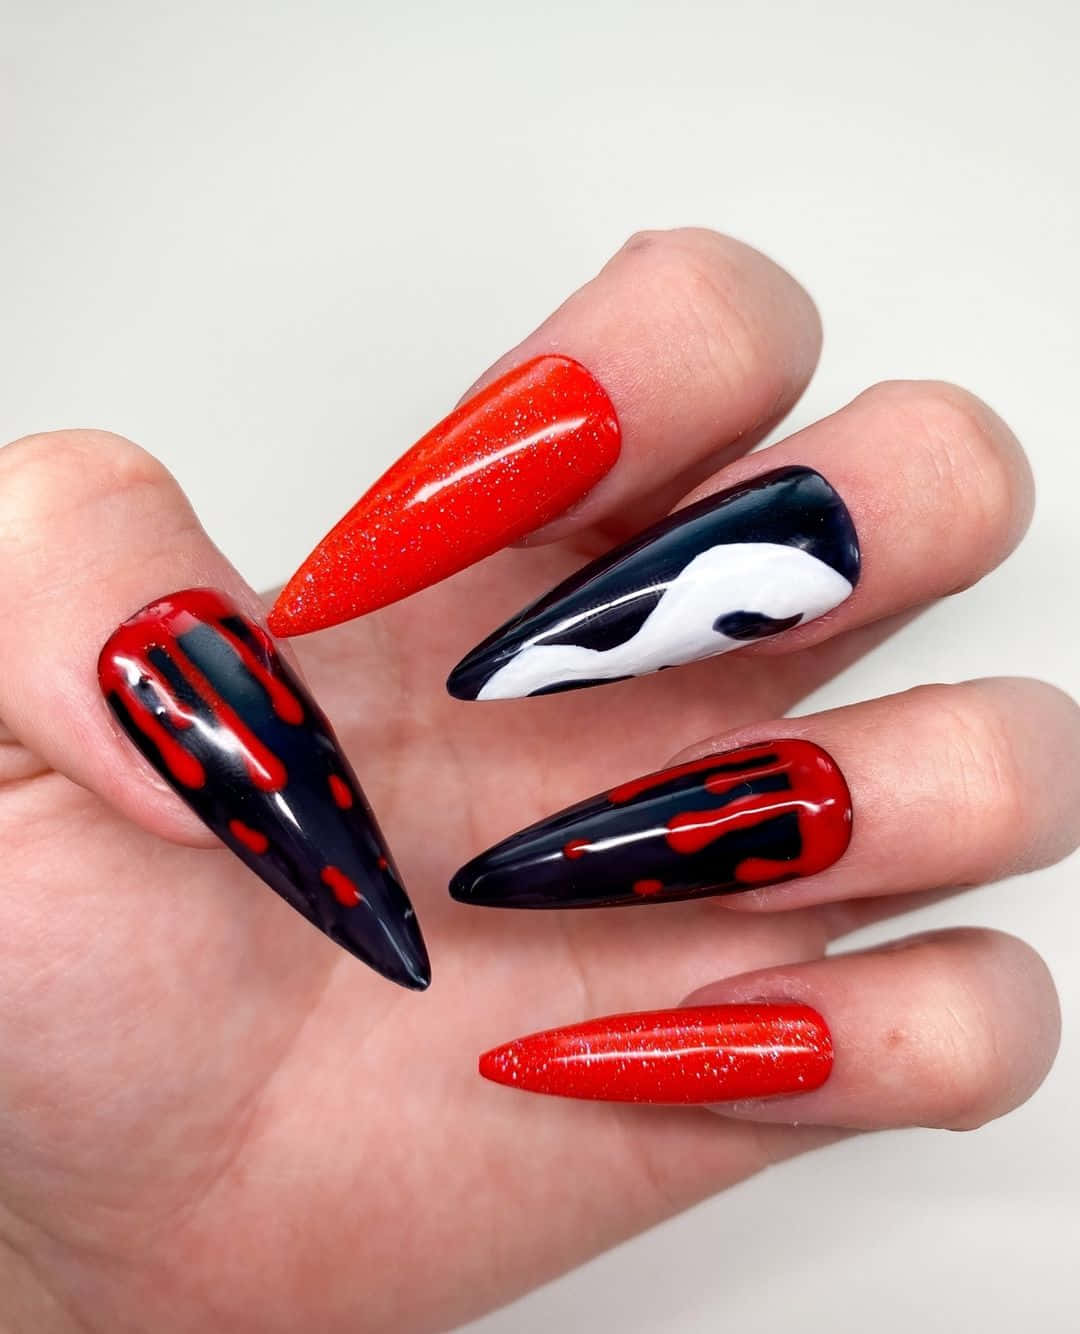 Get into the ghostly spirit with these spook-tacular Halloween Nail Art designs! Wallpaper